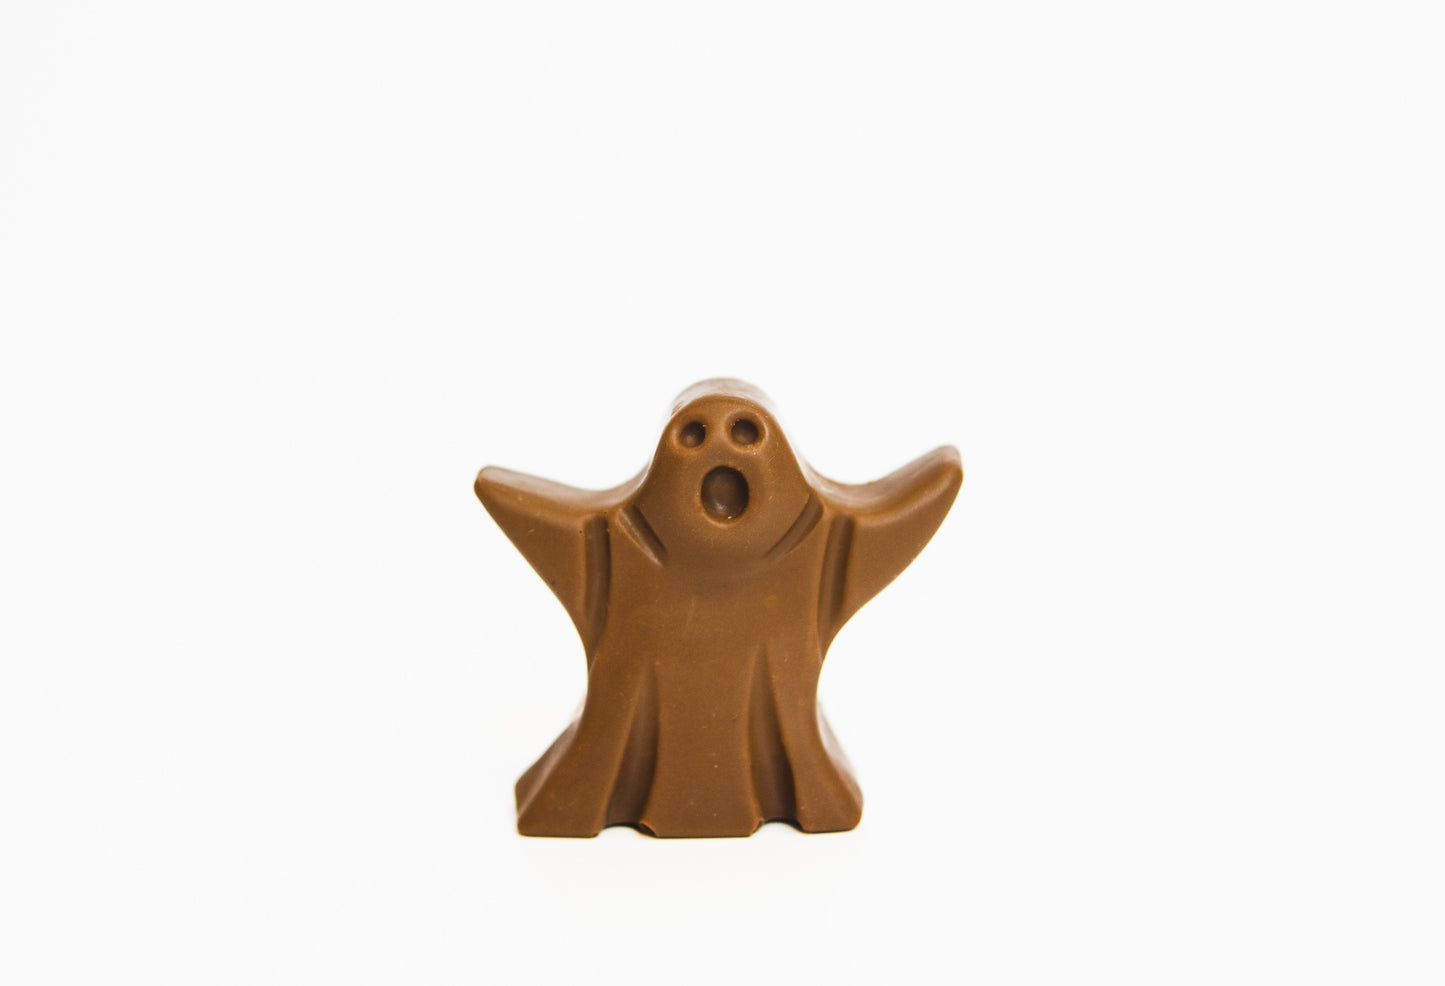 Molded Ghost Arms Up - Milk Chocolate